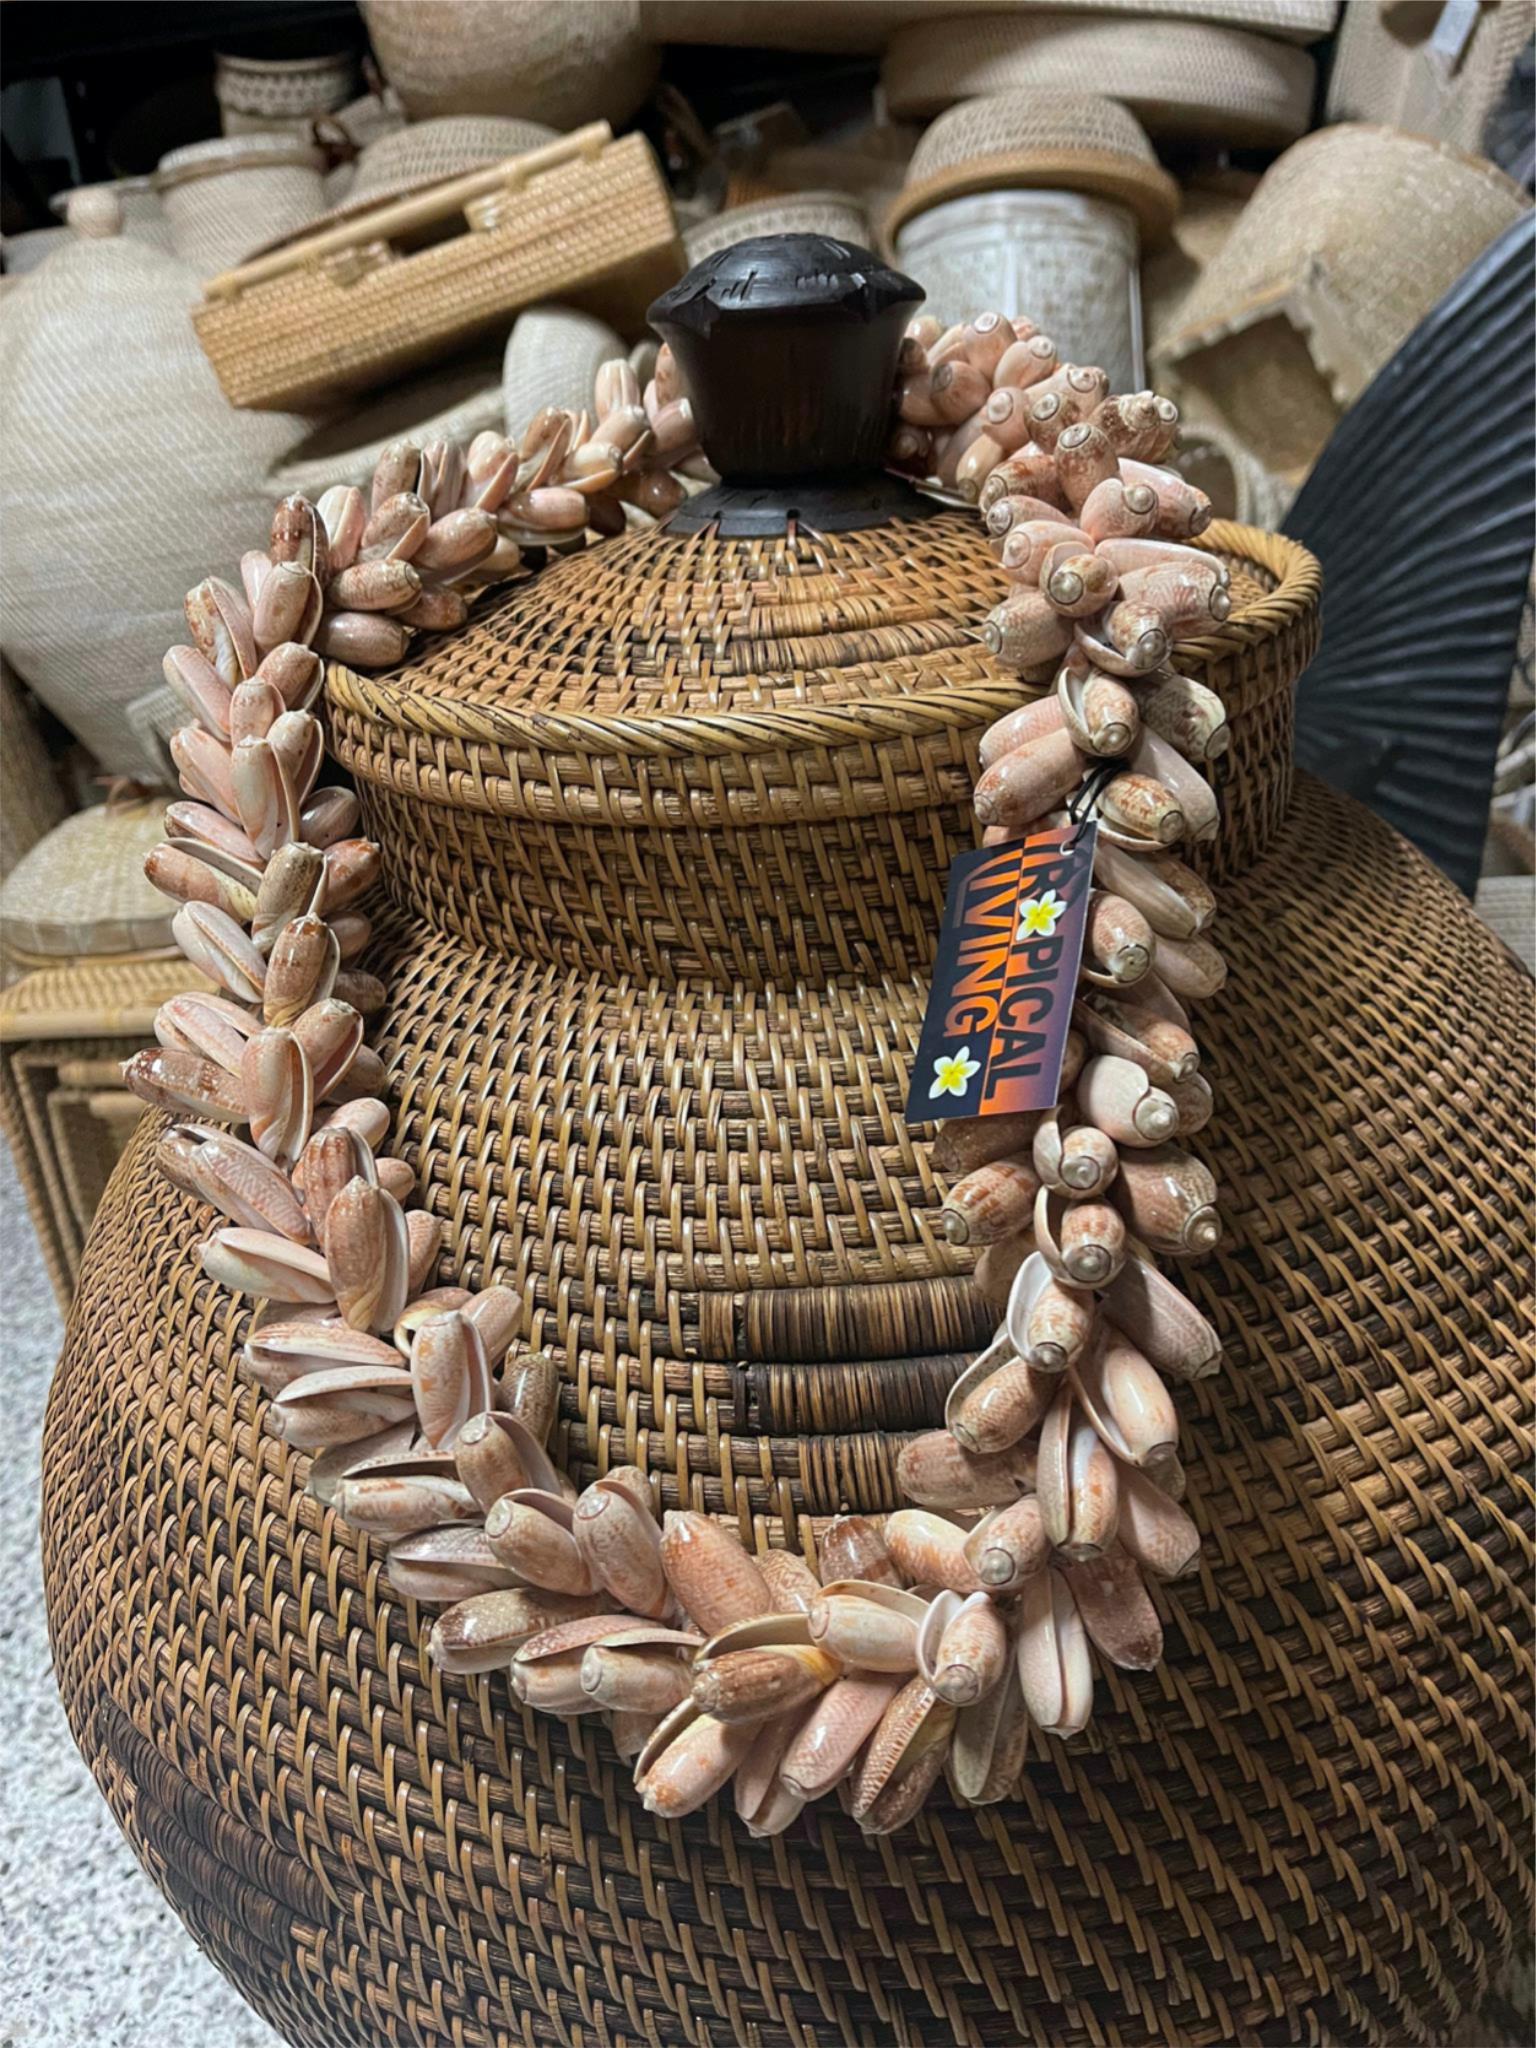 NEW Hand Crafted Balinese Shell Necklace or Garland - Large Bali